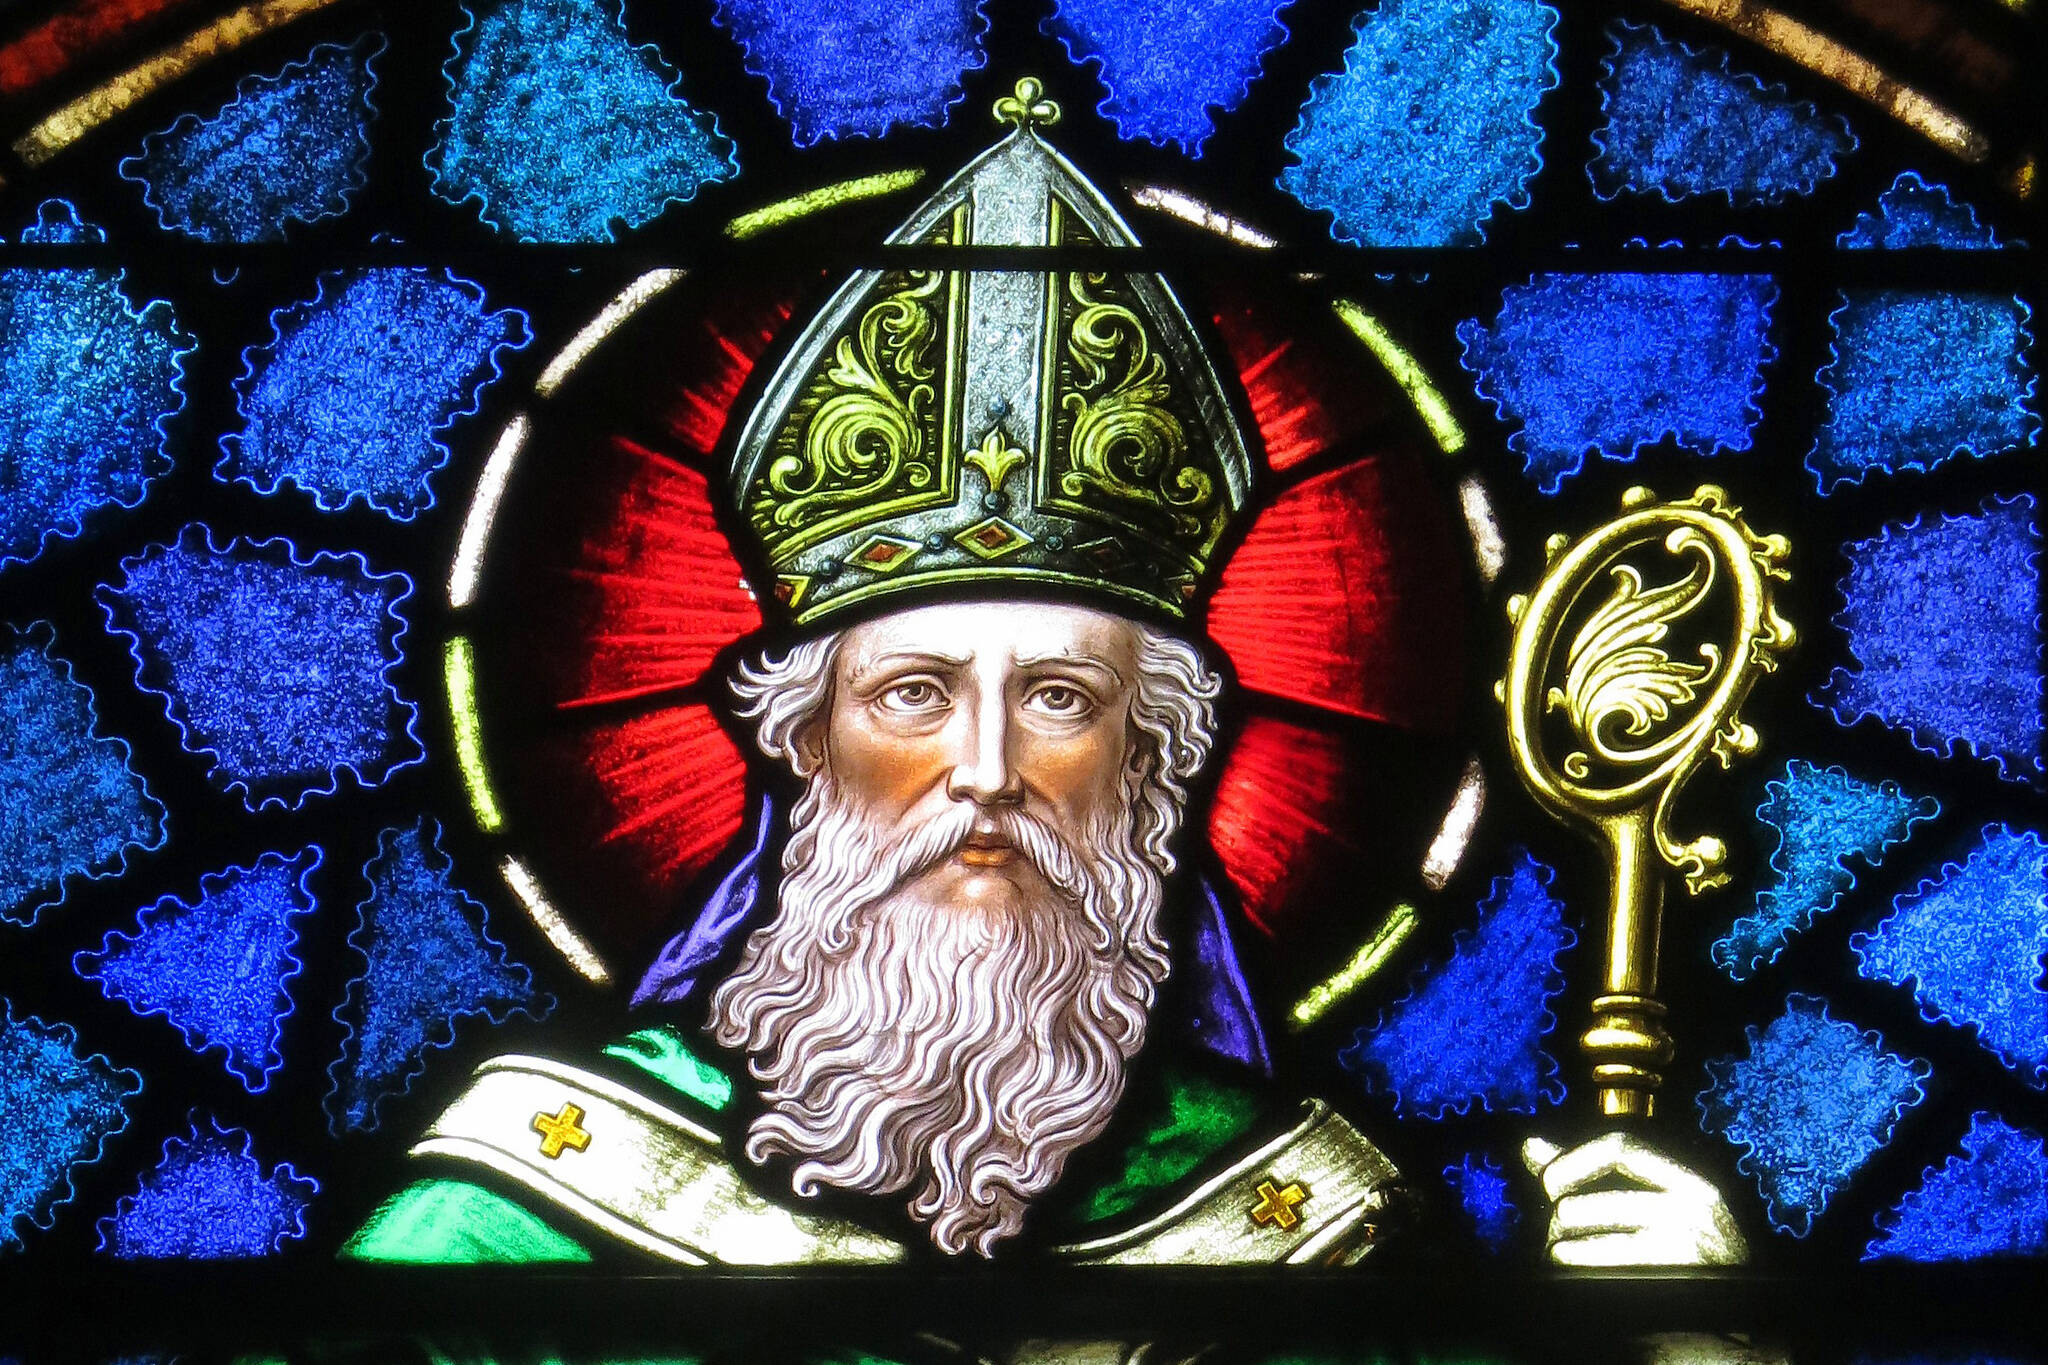 This image of St. Patrick, the patron saint of Ireland, can be seen on Saint Patrick Catholic Church in Junction City, Ohio. (Wikimedia Commons)